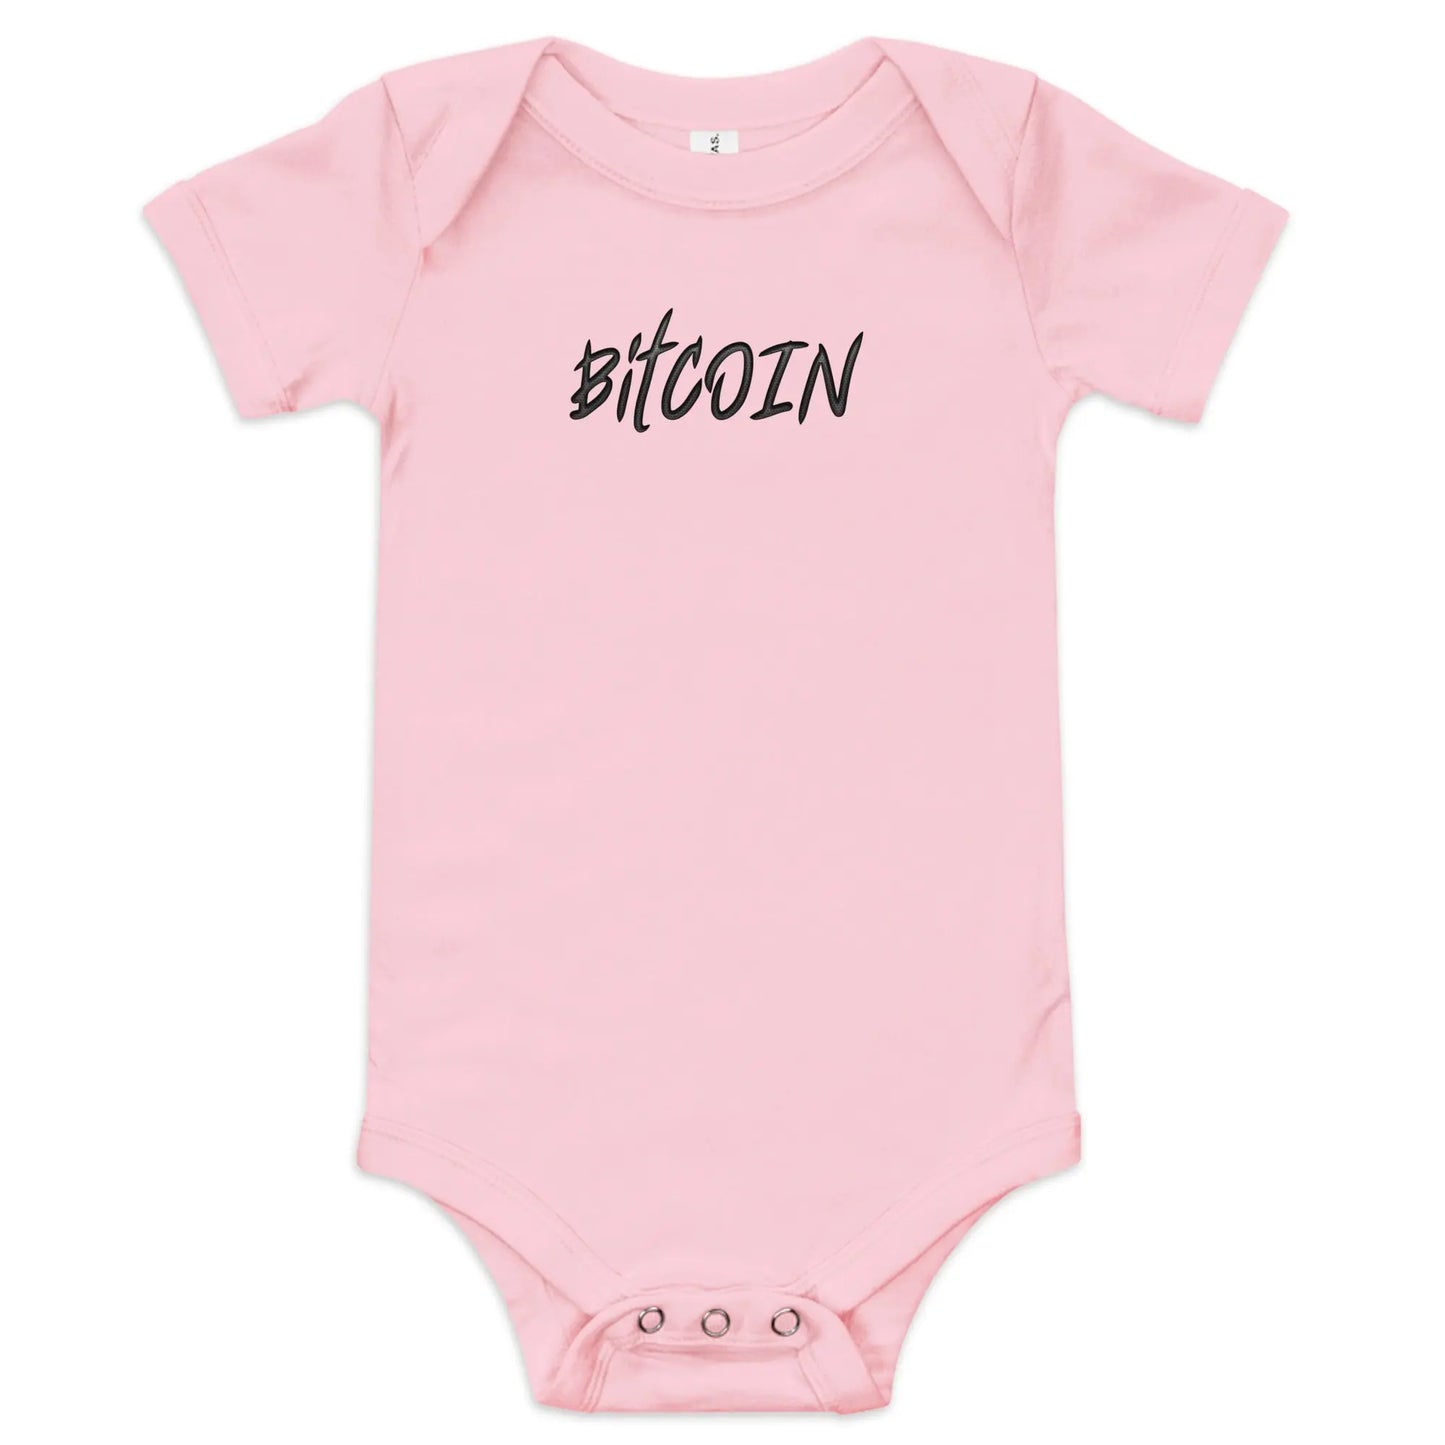 Fearless Bitcoin - Baby Bitcoin Body Suit Pink Color